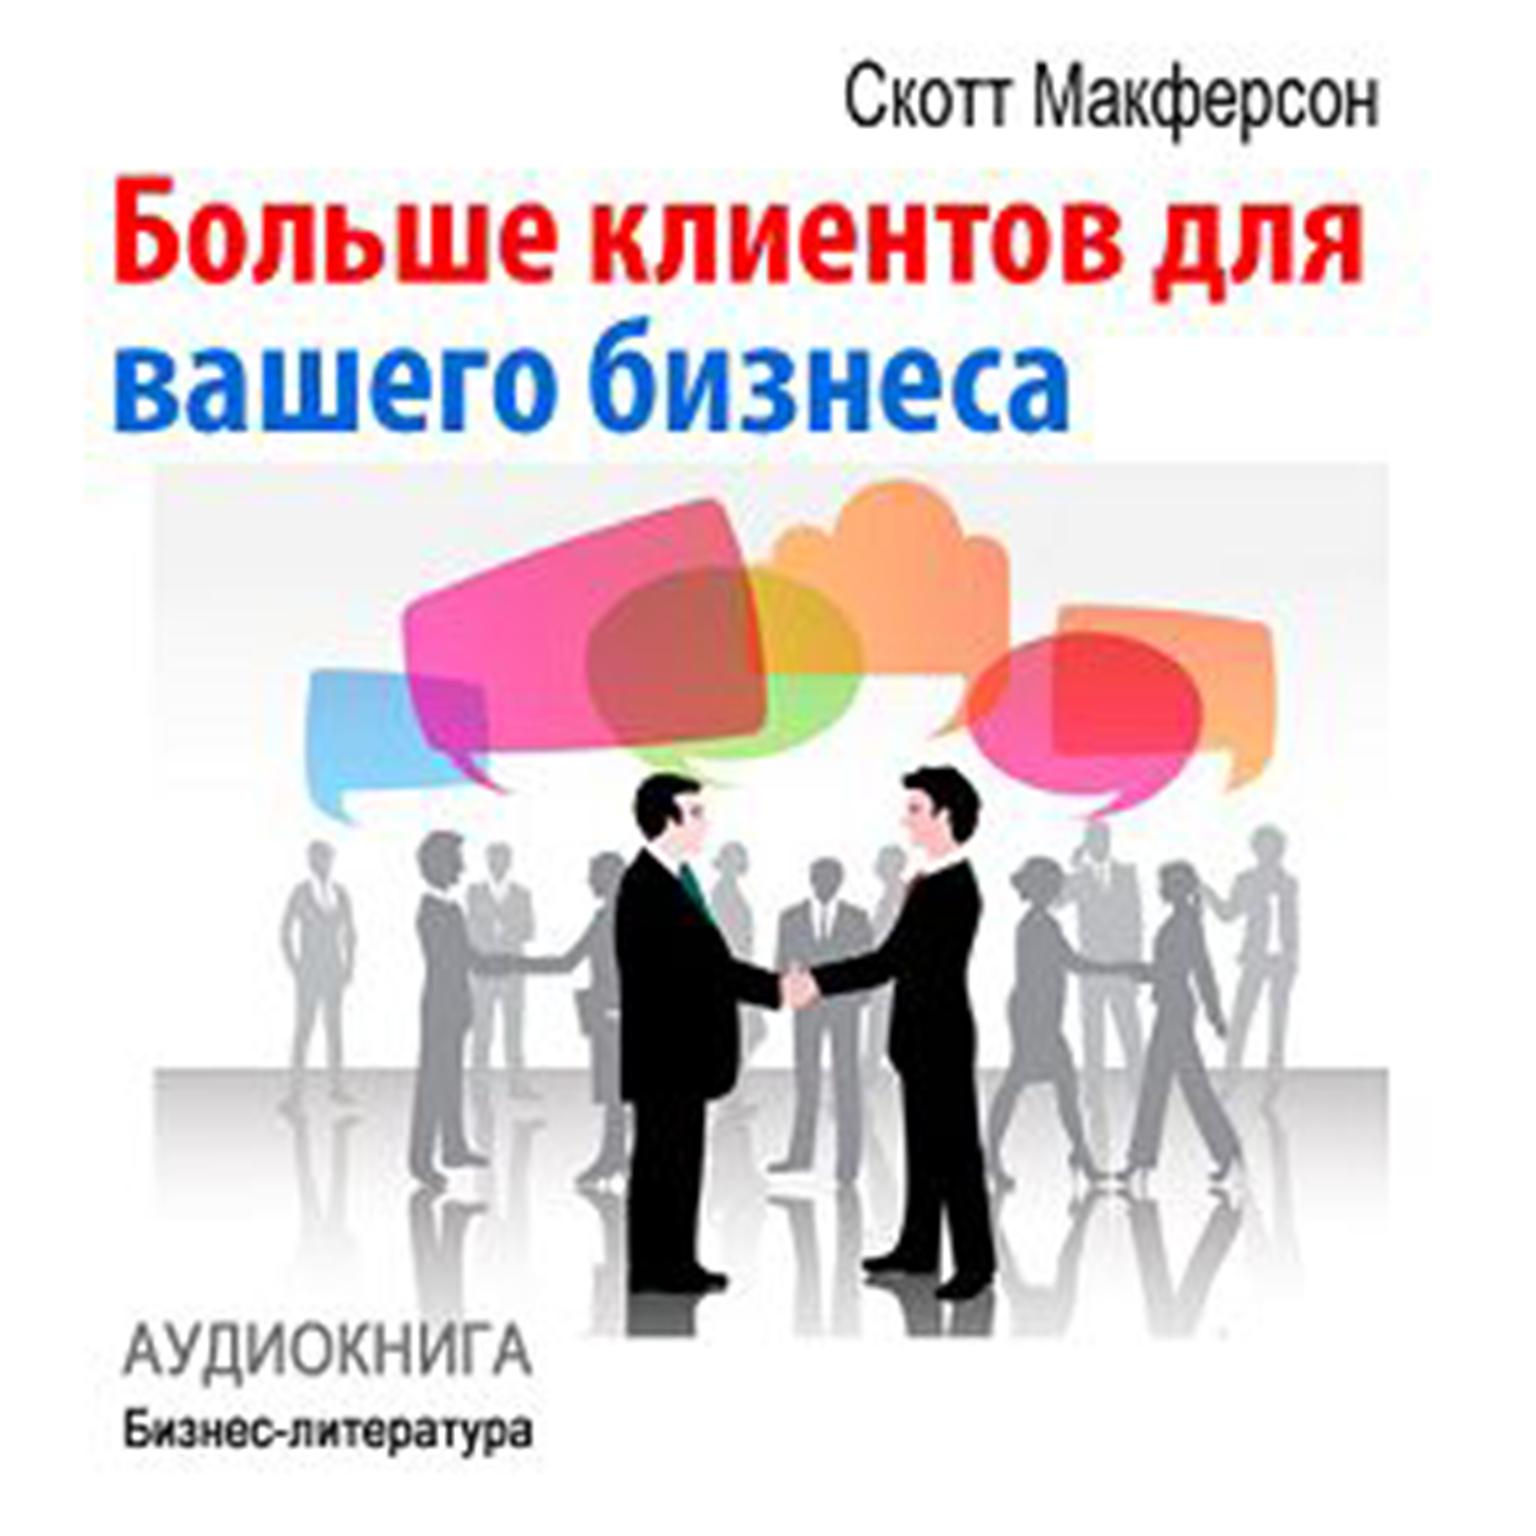 More Customers for Your Business [Russian Edition] Audiobook, by Scott McPherson